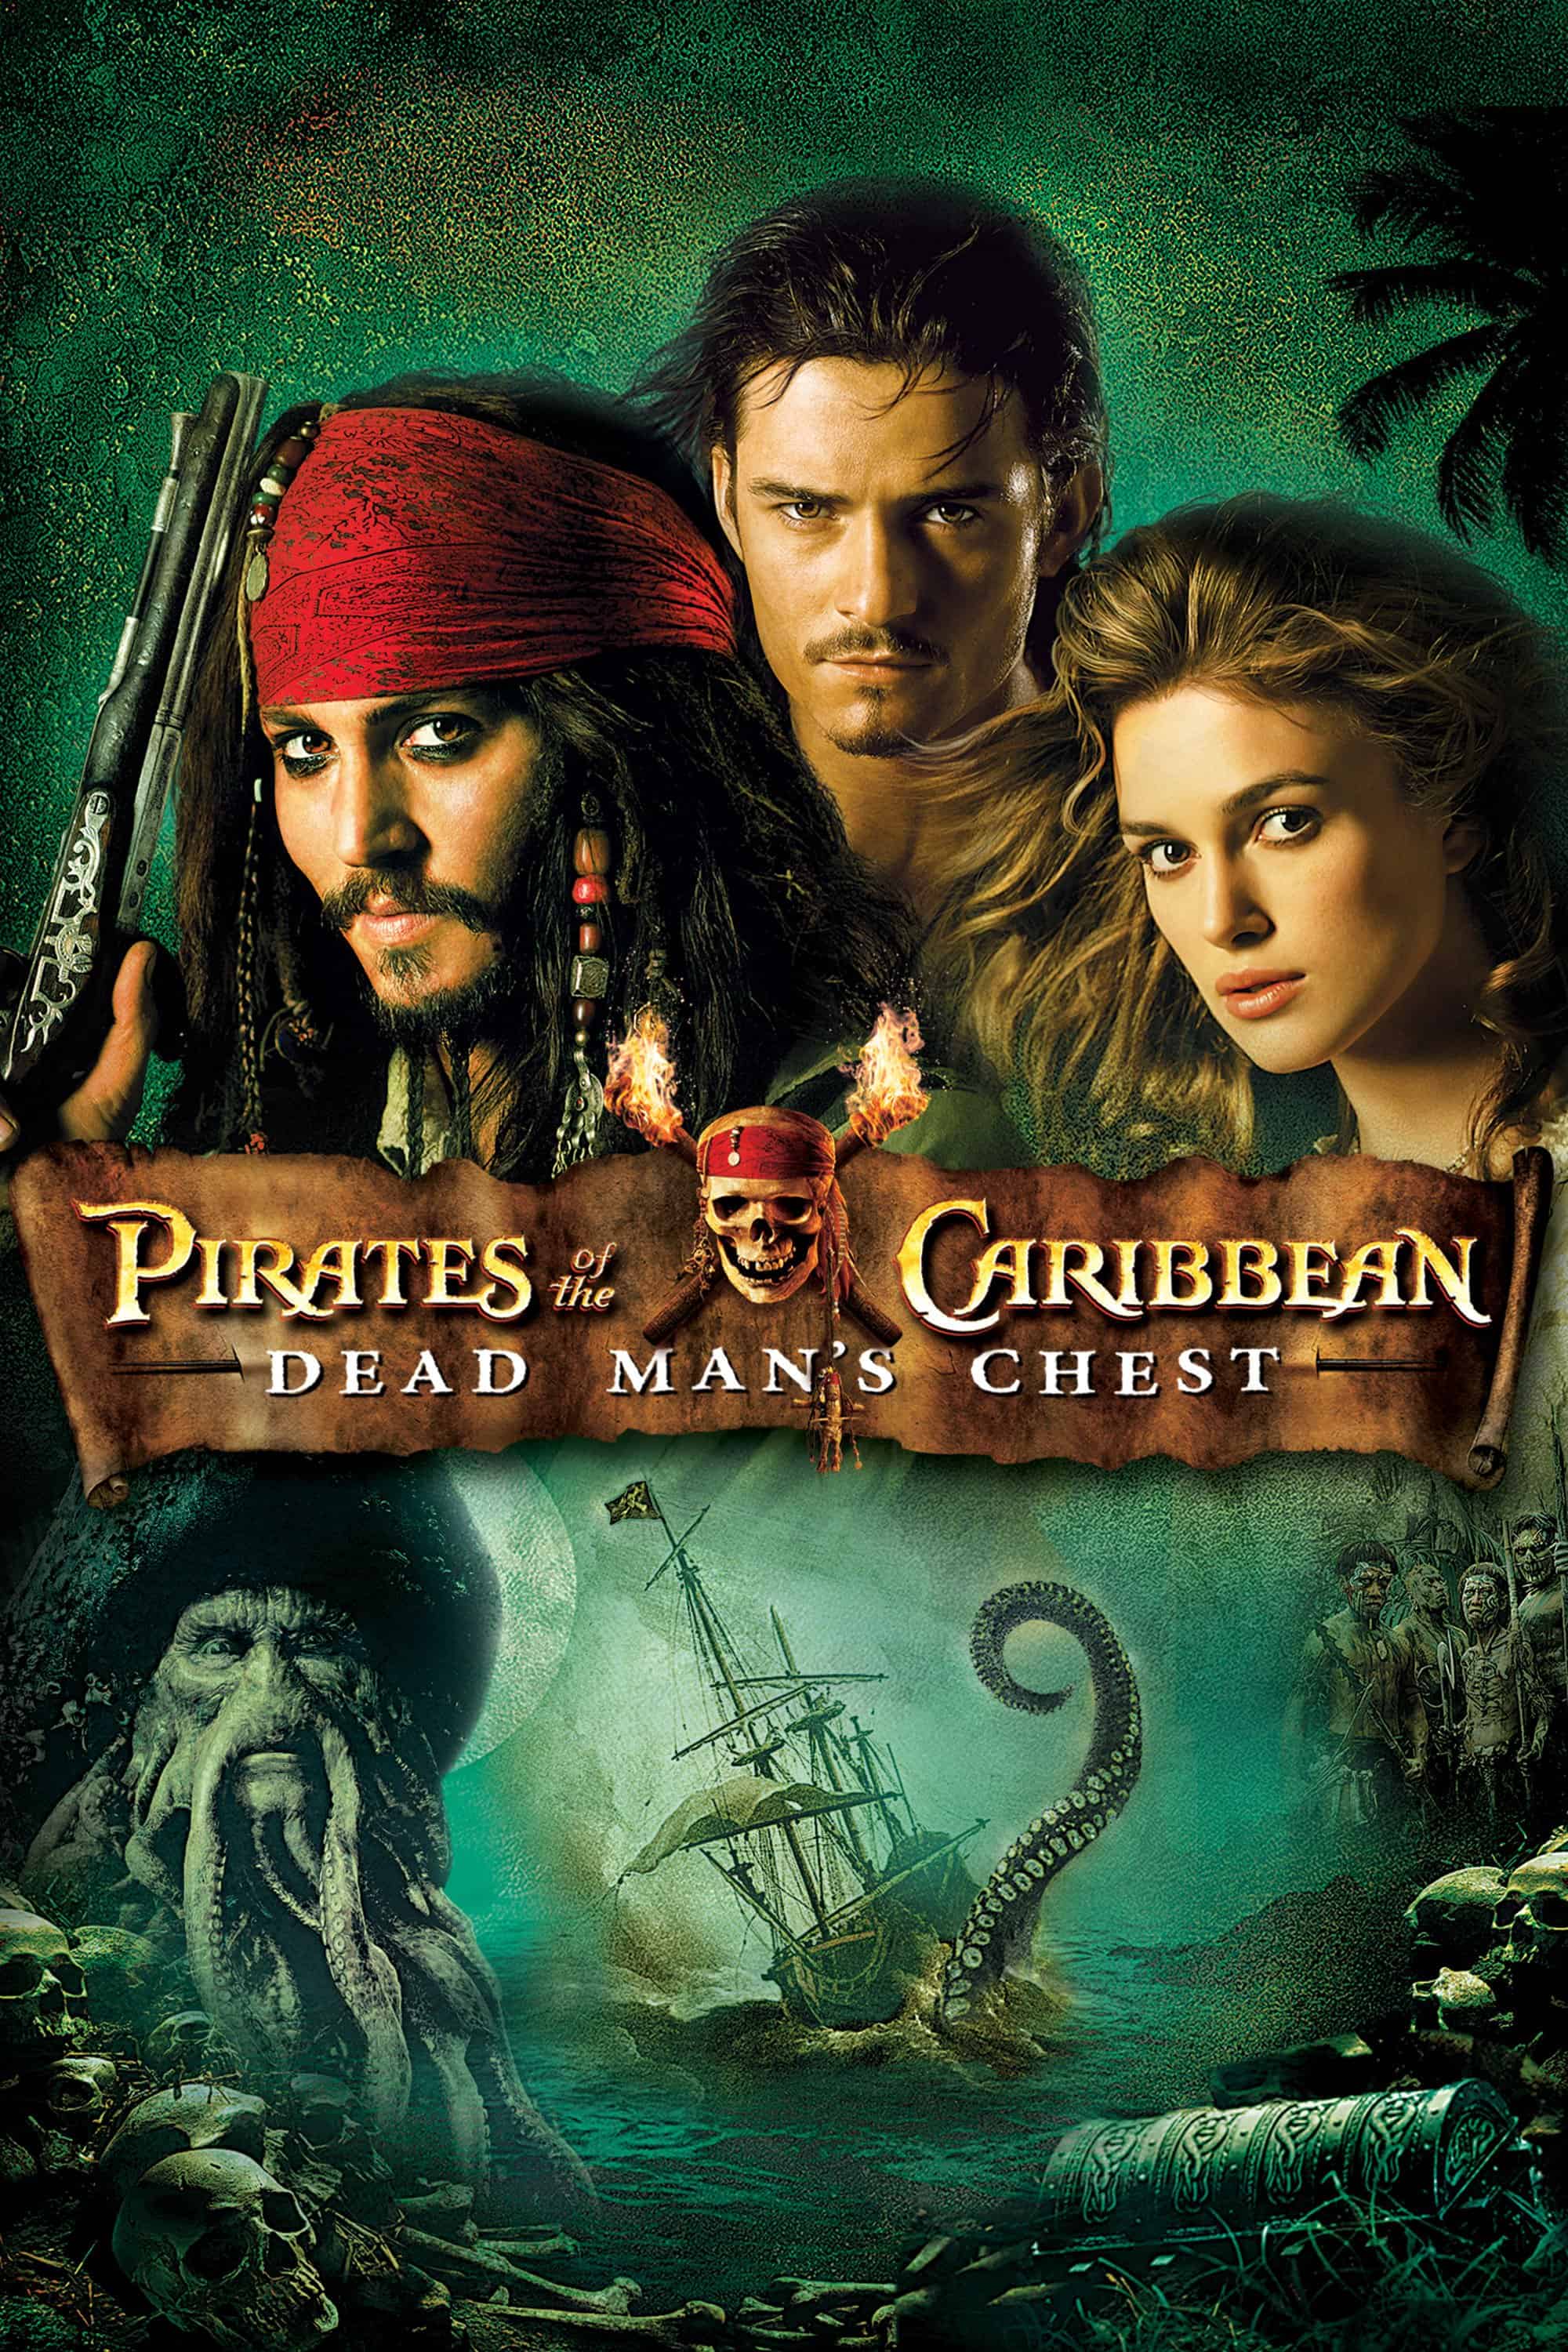 Pirates of the Caribbean: Dead Man's Chest, 2006 